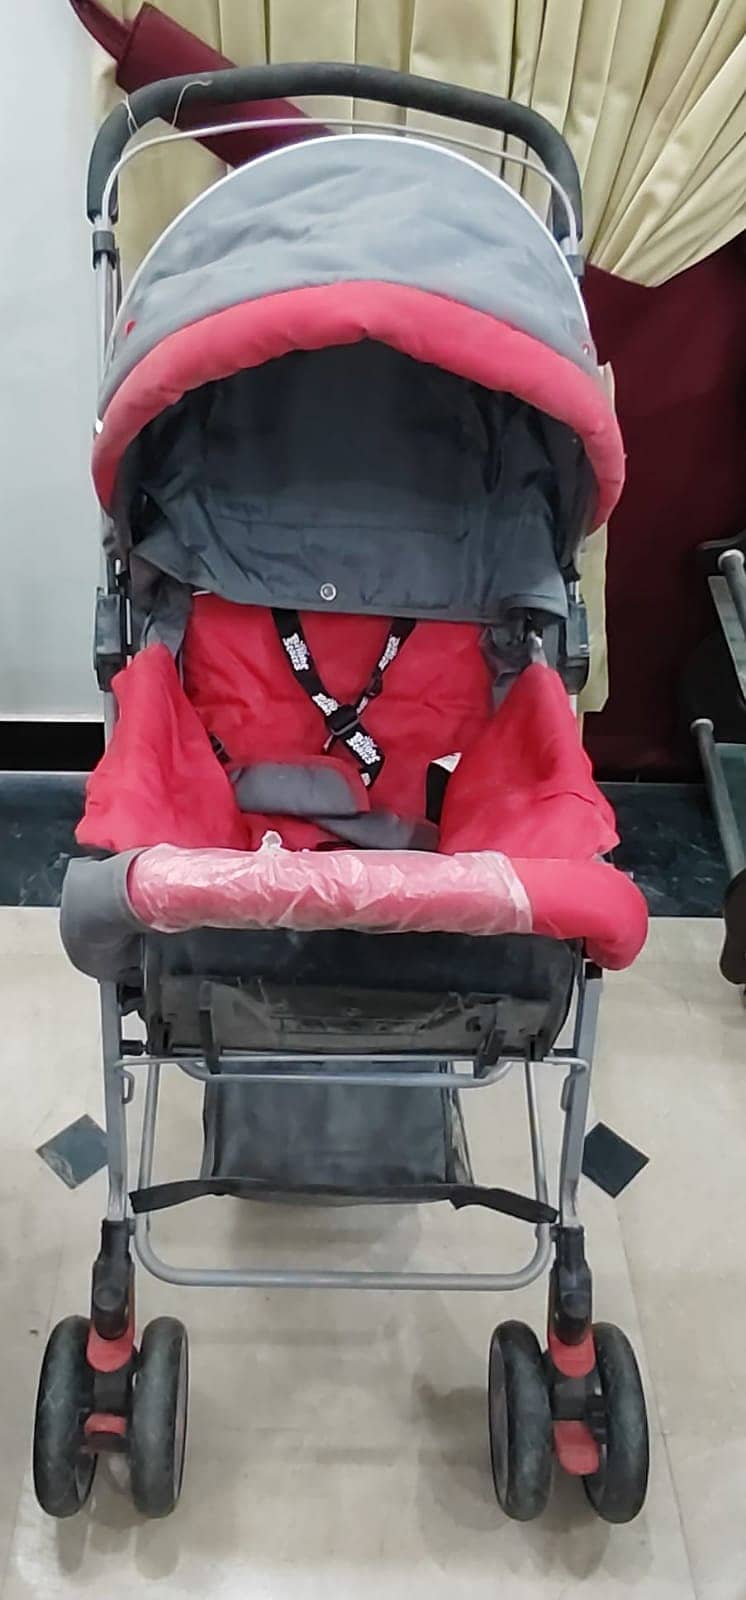 Baby Stroller in Brand New Condition 2